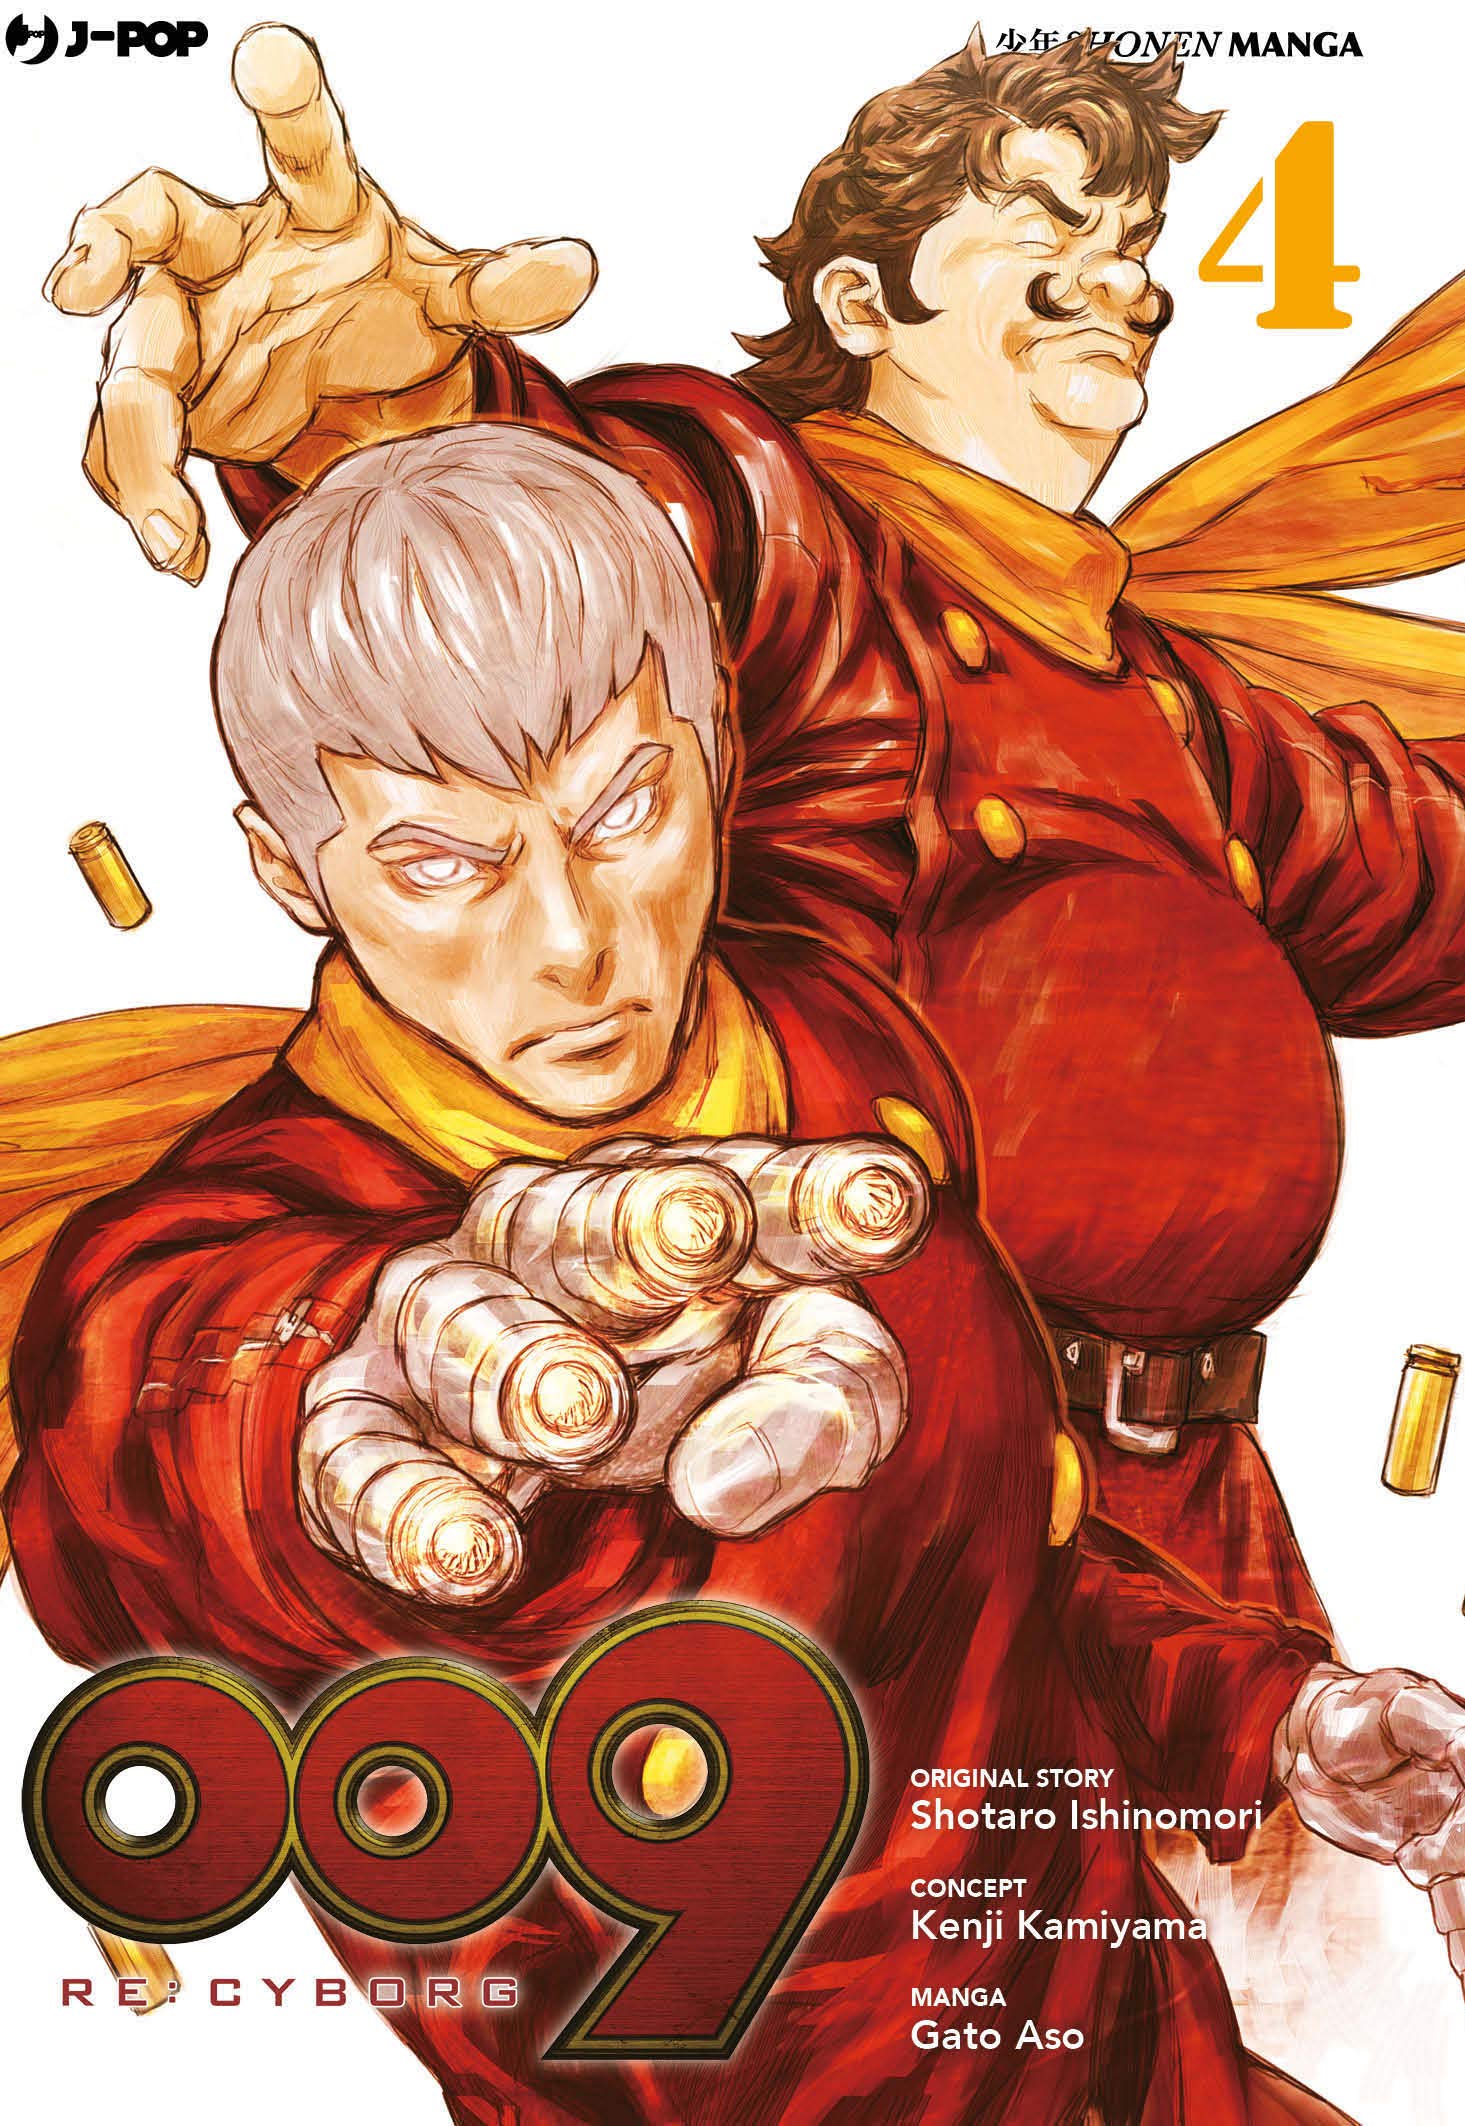 009 RE:CYBORG cover 4